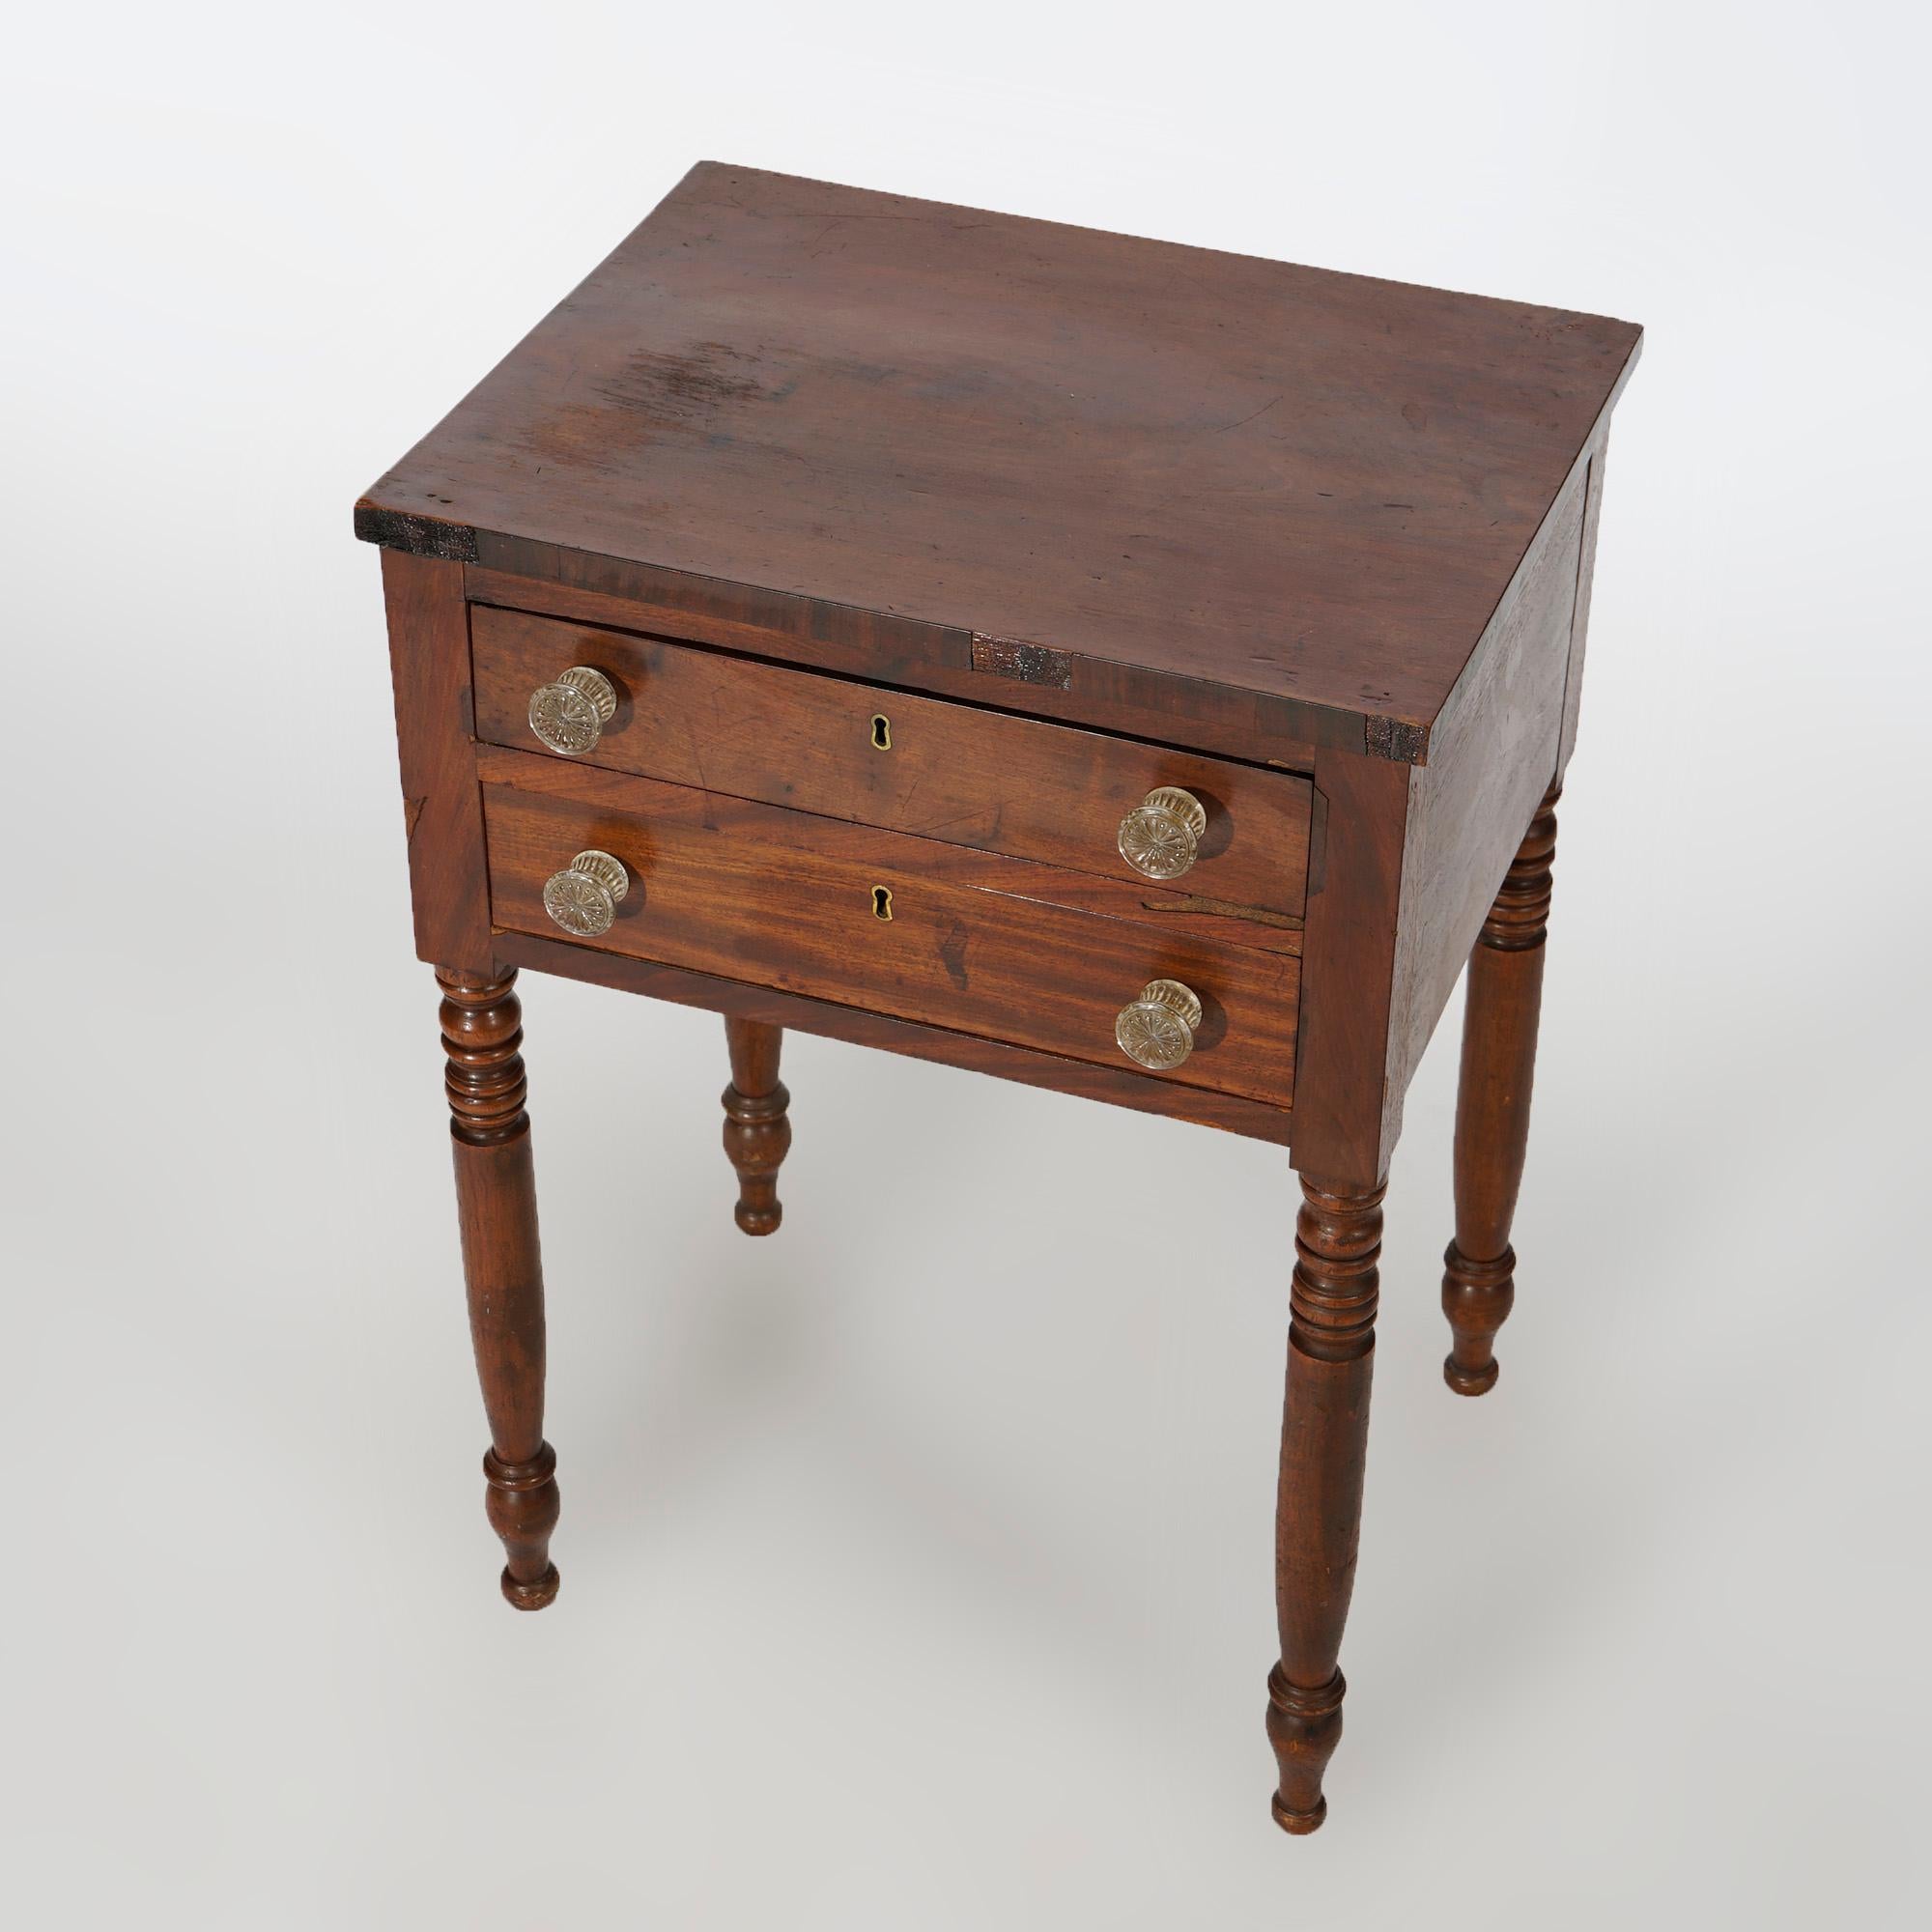 Ann antique Sheraton side stand offers cherry and mahogany construction with case having two drawers (one divided) and raised on turned legs, 19th century

Measures- 29''H x 21''W x 17.25''D.